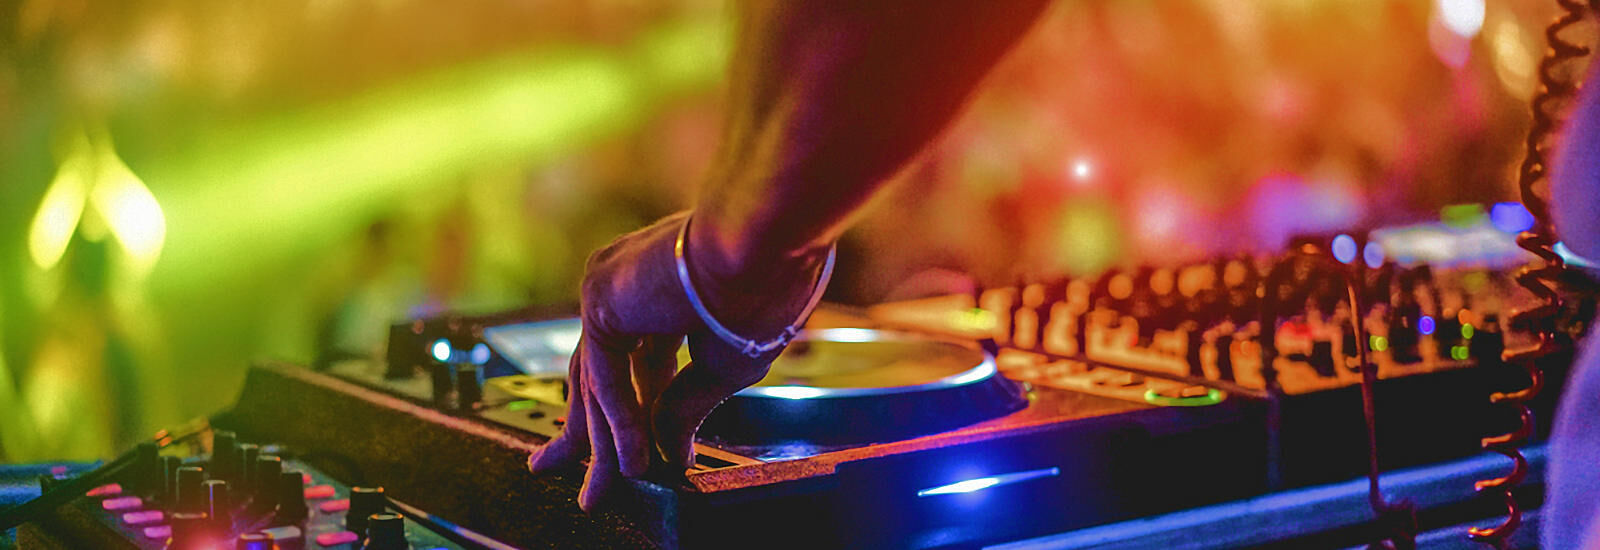 DJs Need in Orlando, Florida to Perform at Events